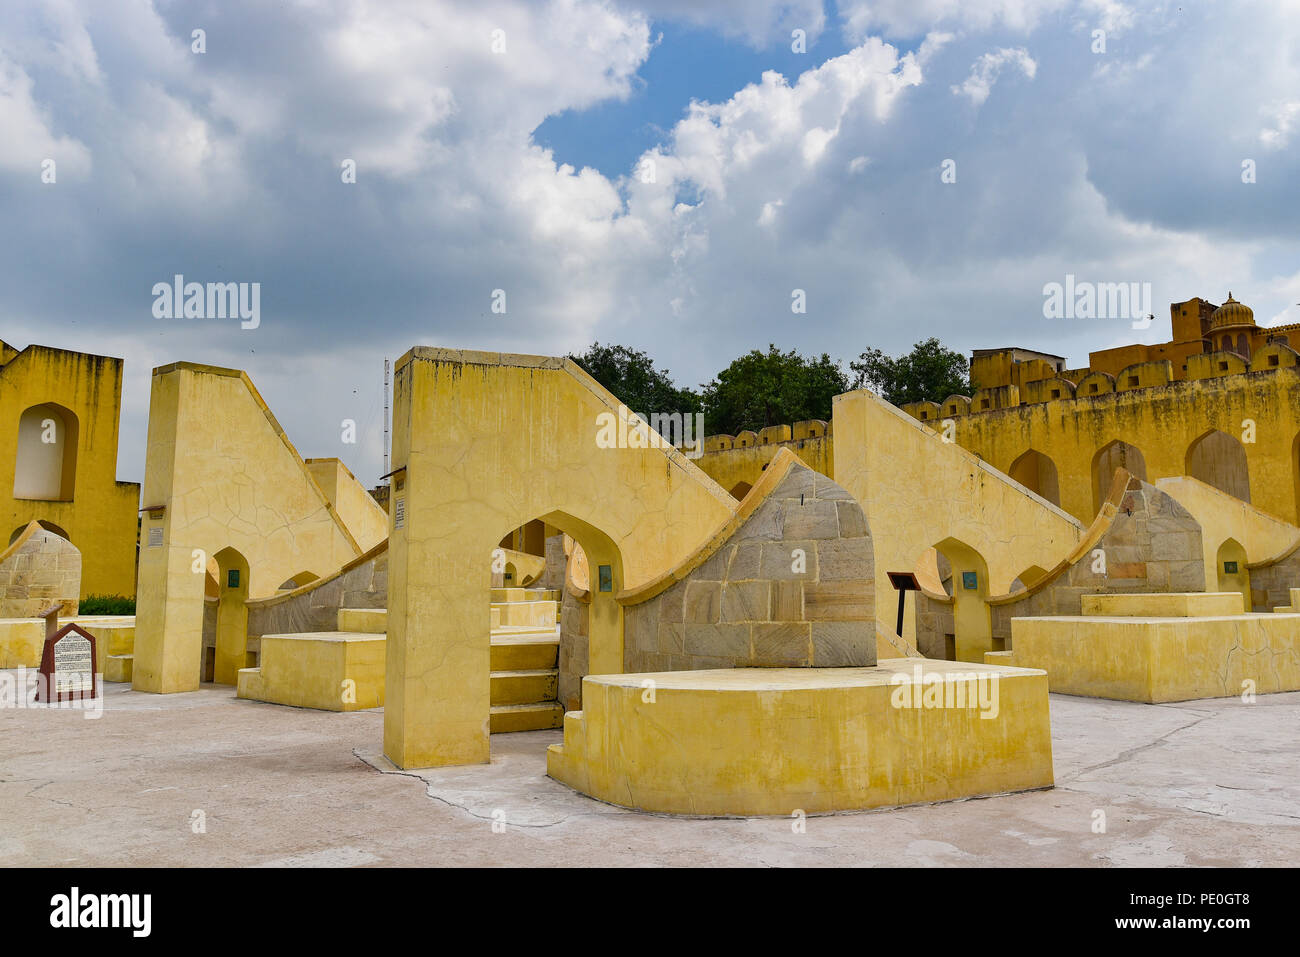 Jantar Mantar, an astronomical observation monument in Jaipur, India Stock Photo